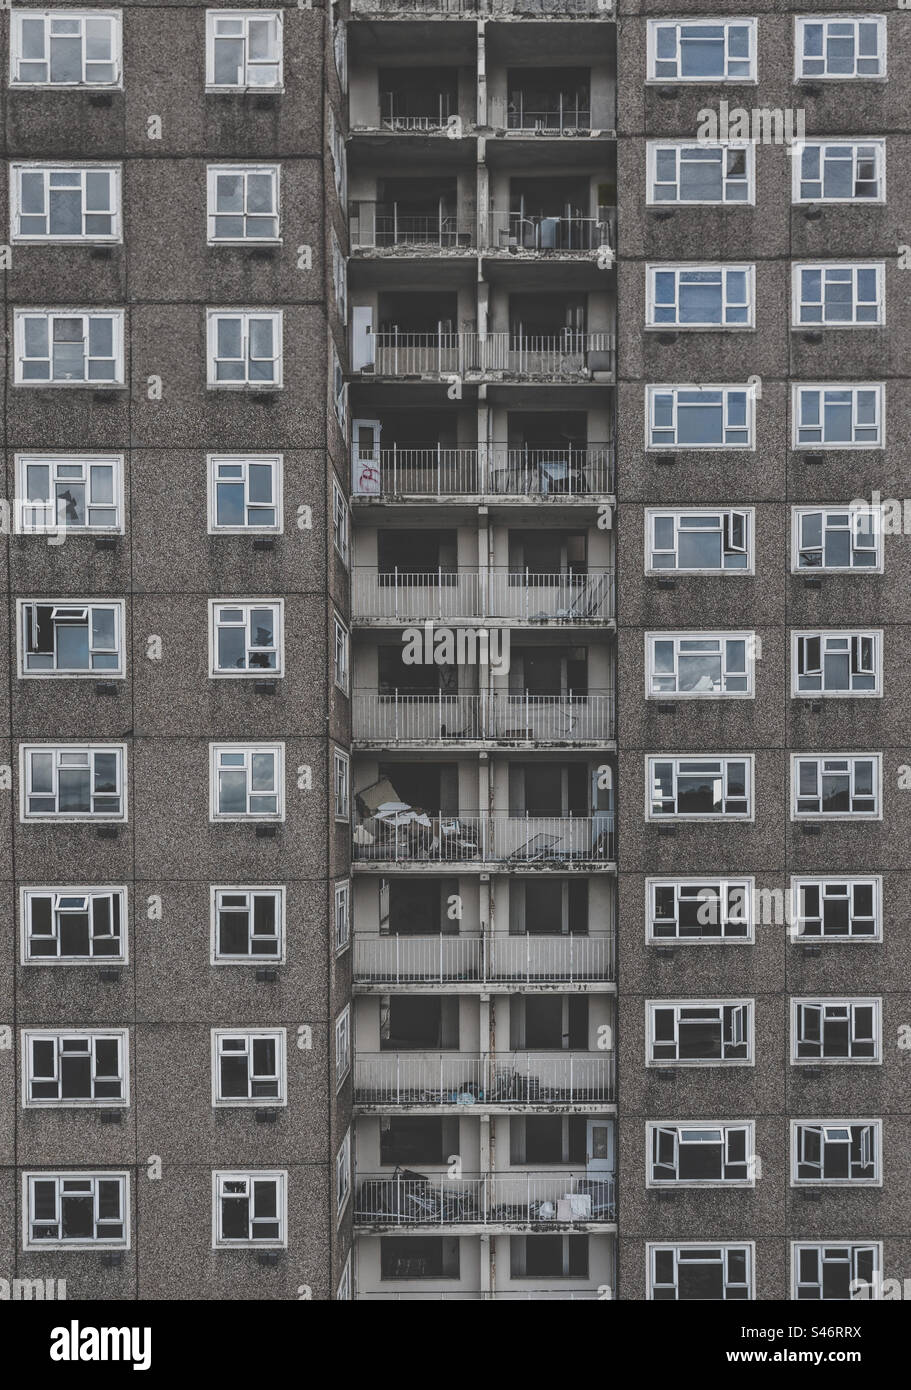 Full frame architecture background of an old and condemned derelict tower block in the UK  from the Sixties with concrete walls and old balconies with broken windows Stock Photo